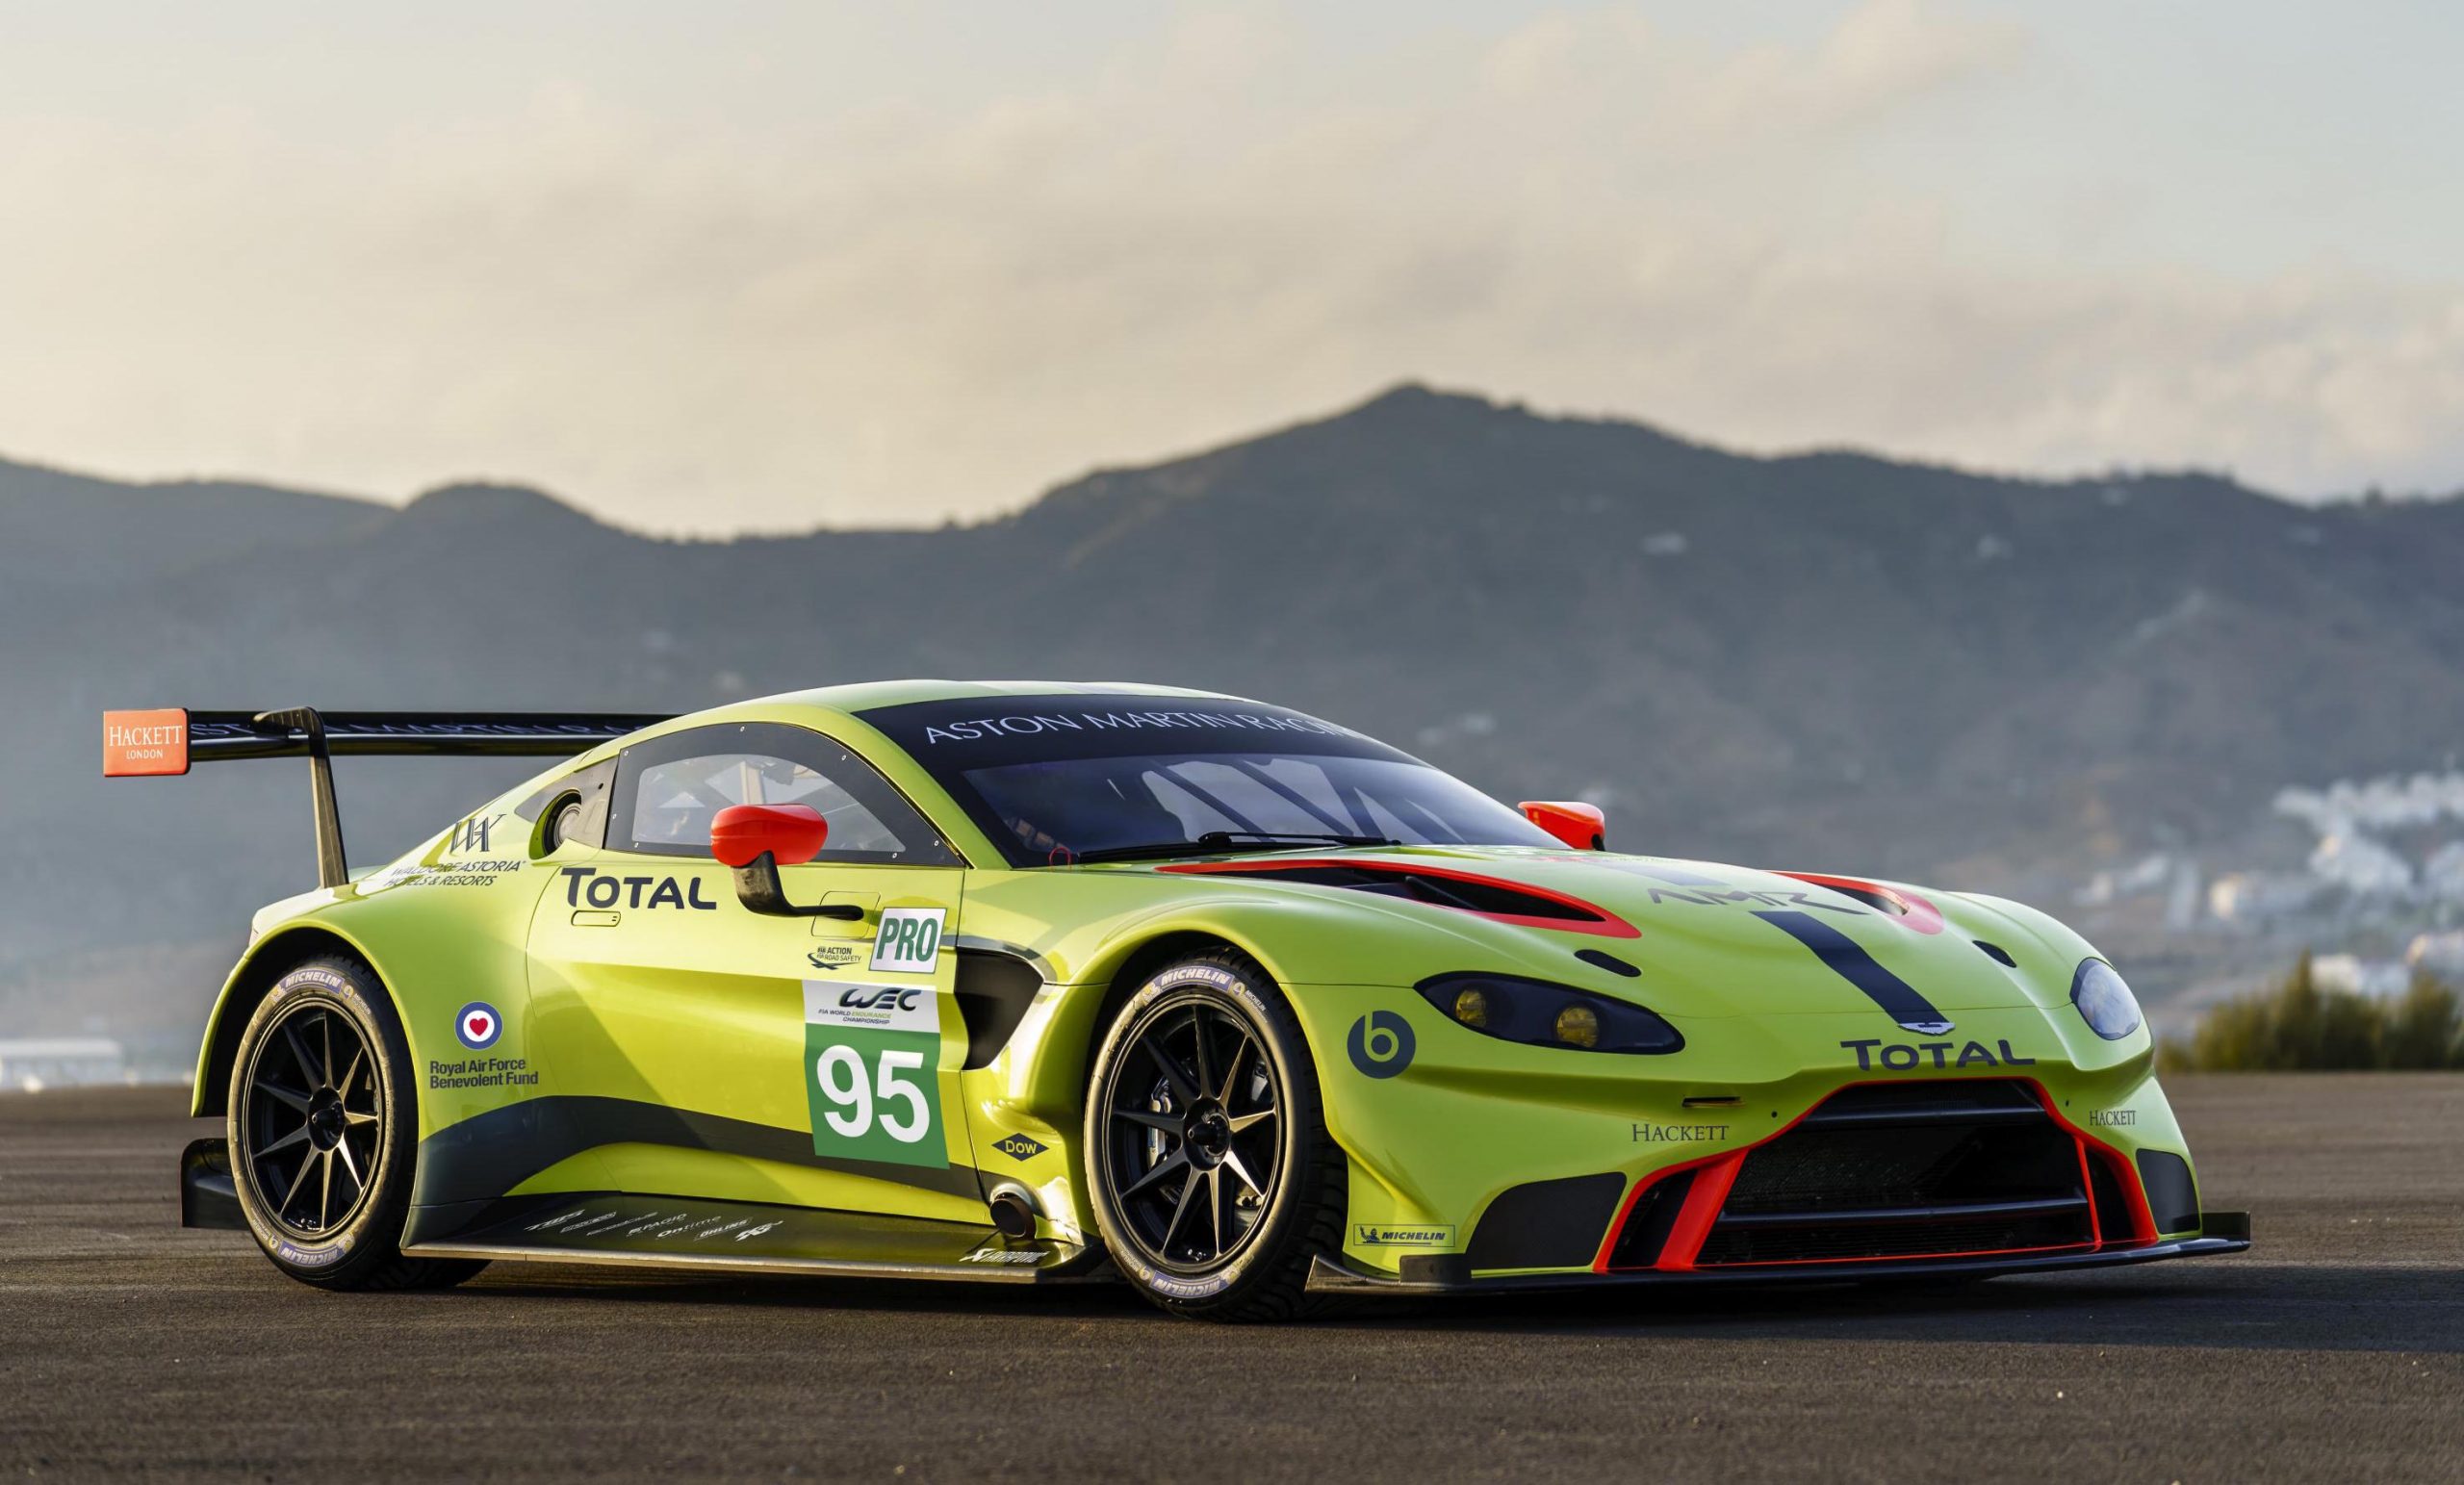 2018 Aston Martin Vantage GTE is ready for racing